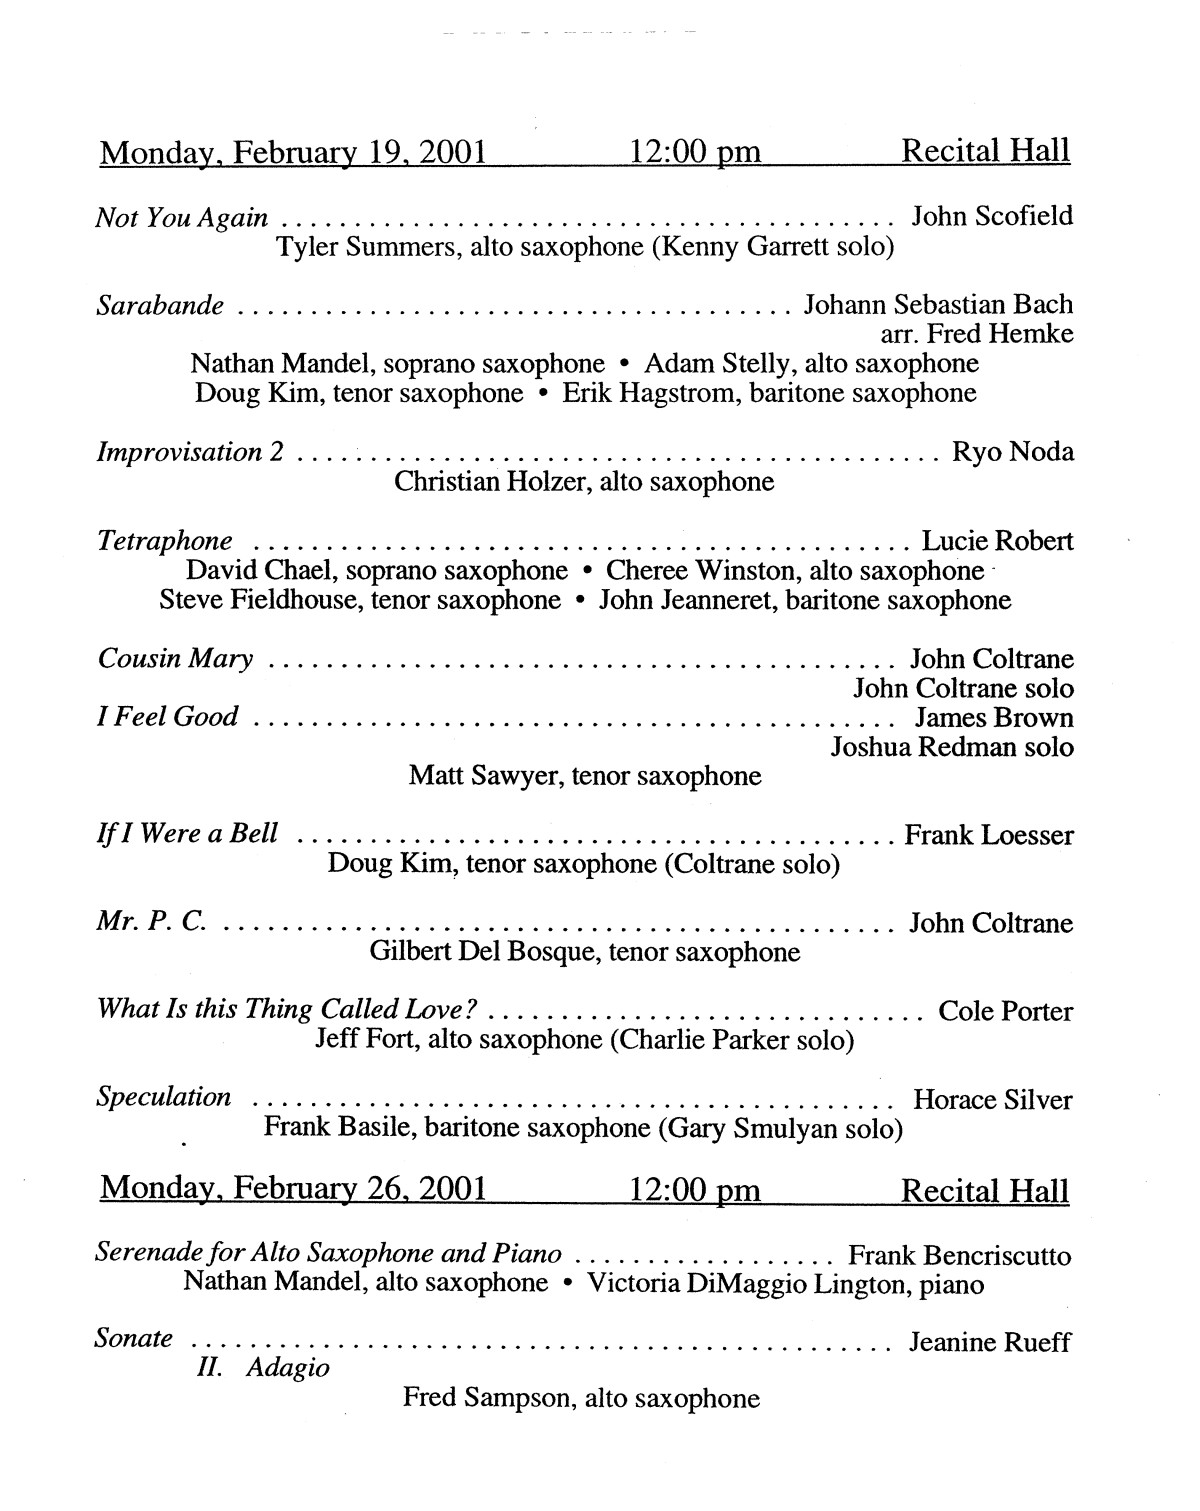 College Of Music Program Book 00 01 Ensemble Performances Vol 2 Page 285 Of 364 Unt Digital Library